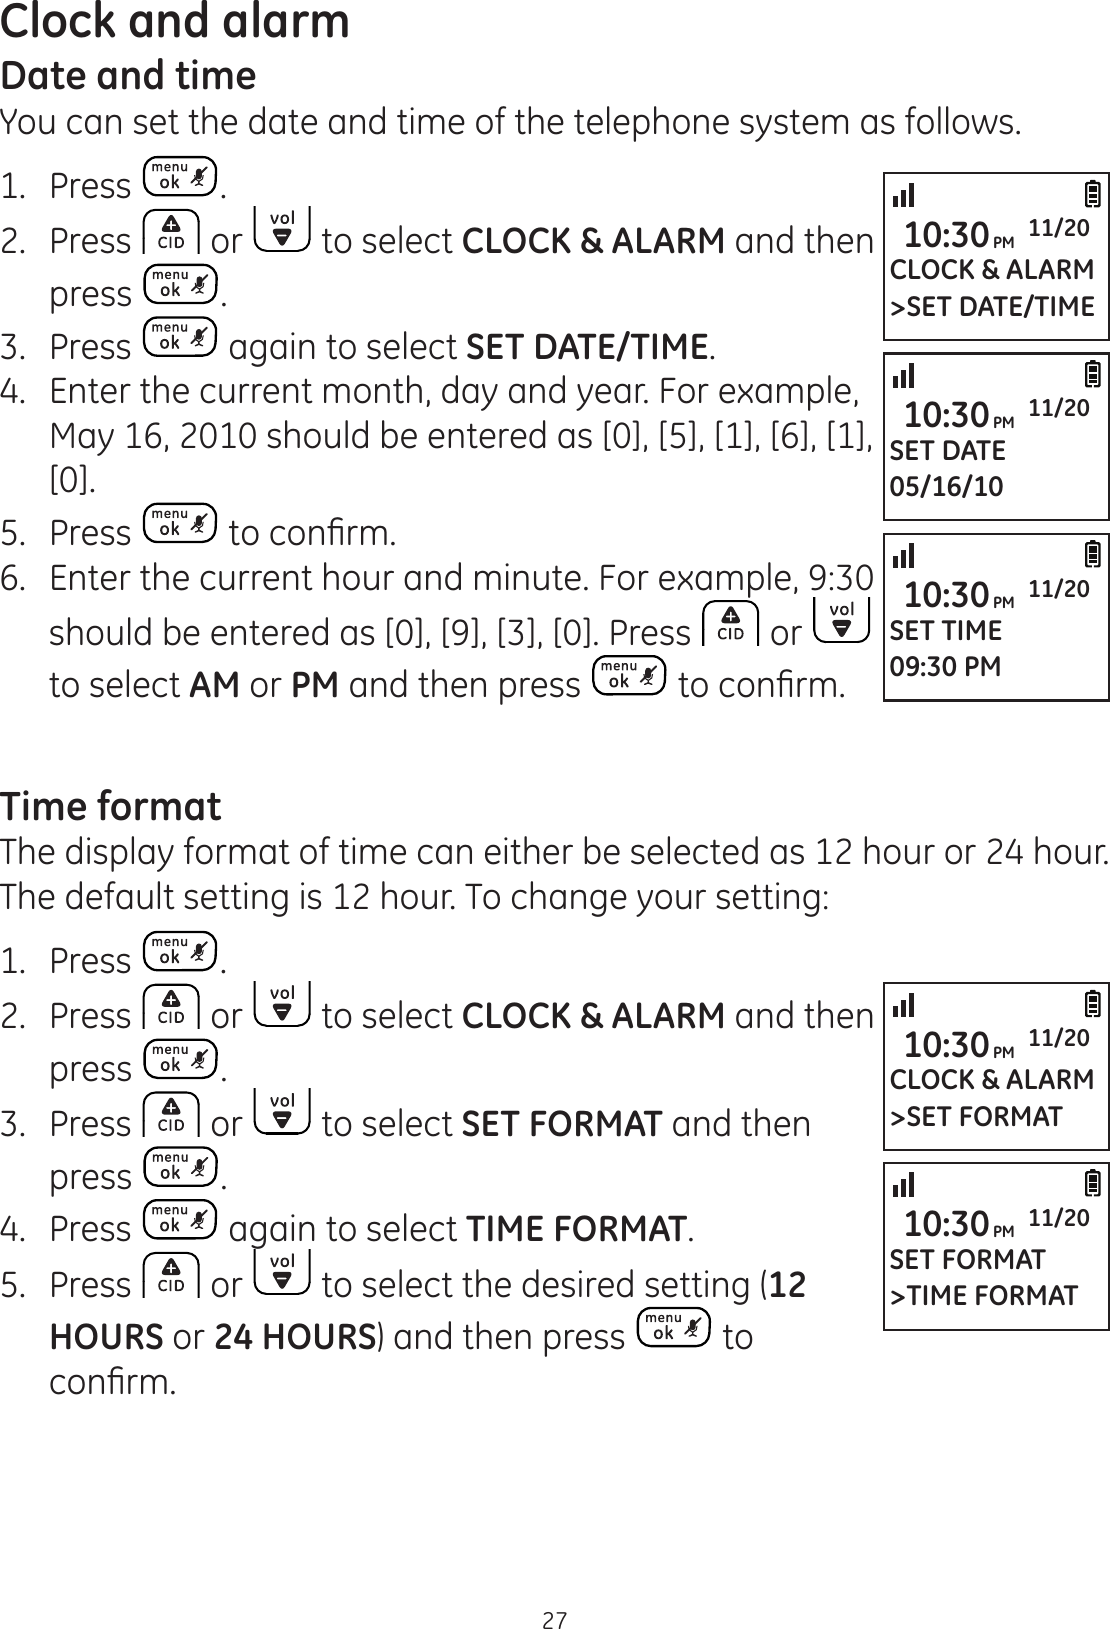 27Clock and alarmDate and timeYou can set the date and time of the telephone system as follows.1.  Press .2.  Press   or   to select CLOCK &amp; ALARM and then press  .3.  Press   again to select SET DATE/TIME.4.  Enter the current month, day and year. For example, May 16, 2010 should be entered as [0], [5], [1], [6], [1], [0].5.  Press  WRFRQ¿UP6.  Enter the current hour and minute. For example, 9:30 should be entered as [0], [9], [3], [0]. Press   or   to select AM or PM and then press  WRFRQ¿UPTime formatThe display format of time can either be selected as 12 hour or 24 hour. The default setting is 12 hour. To change your setting:1.  Press  .2.  Press   or   to select CLOCK &amp; ALARM and then press  .3.  Press   or   to select SET FORMAT and then press  .4.  Press   again to select TIME FORMAT.5.  Press   or   to select the desired setting (12 HOURS or 24 HOURS) and then press   to FRQ¿UPCLOCK &amp; ALARM&gt;SET DATE/TIME10:30PM 11/20SET DATE05/16/1010:30PM 11/20SET TIME09:30 PM10:30PM 11/20CLOCK &amp; ALARM&gt;SET FORMAT10:30PM 11/20SET FORMAT&gt;TIME FORMAT10:30PM 11/20